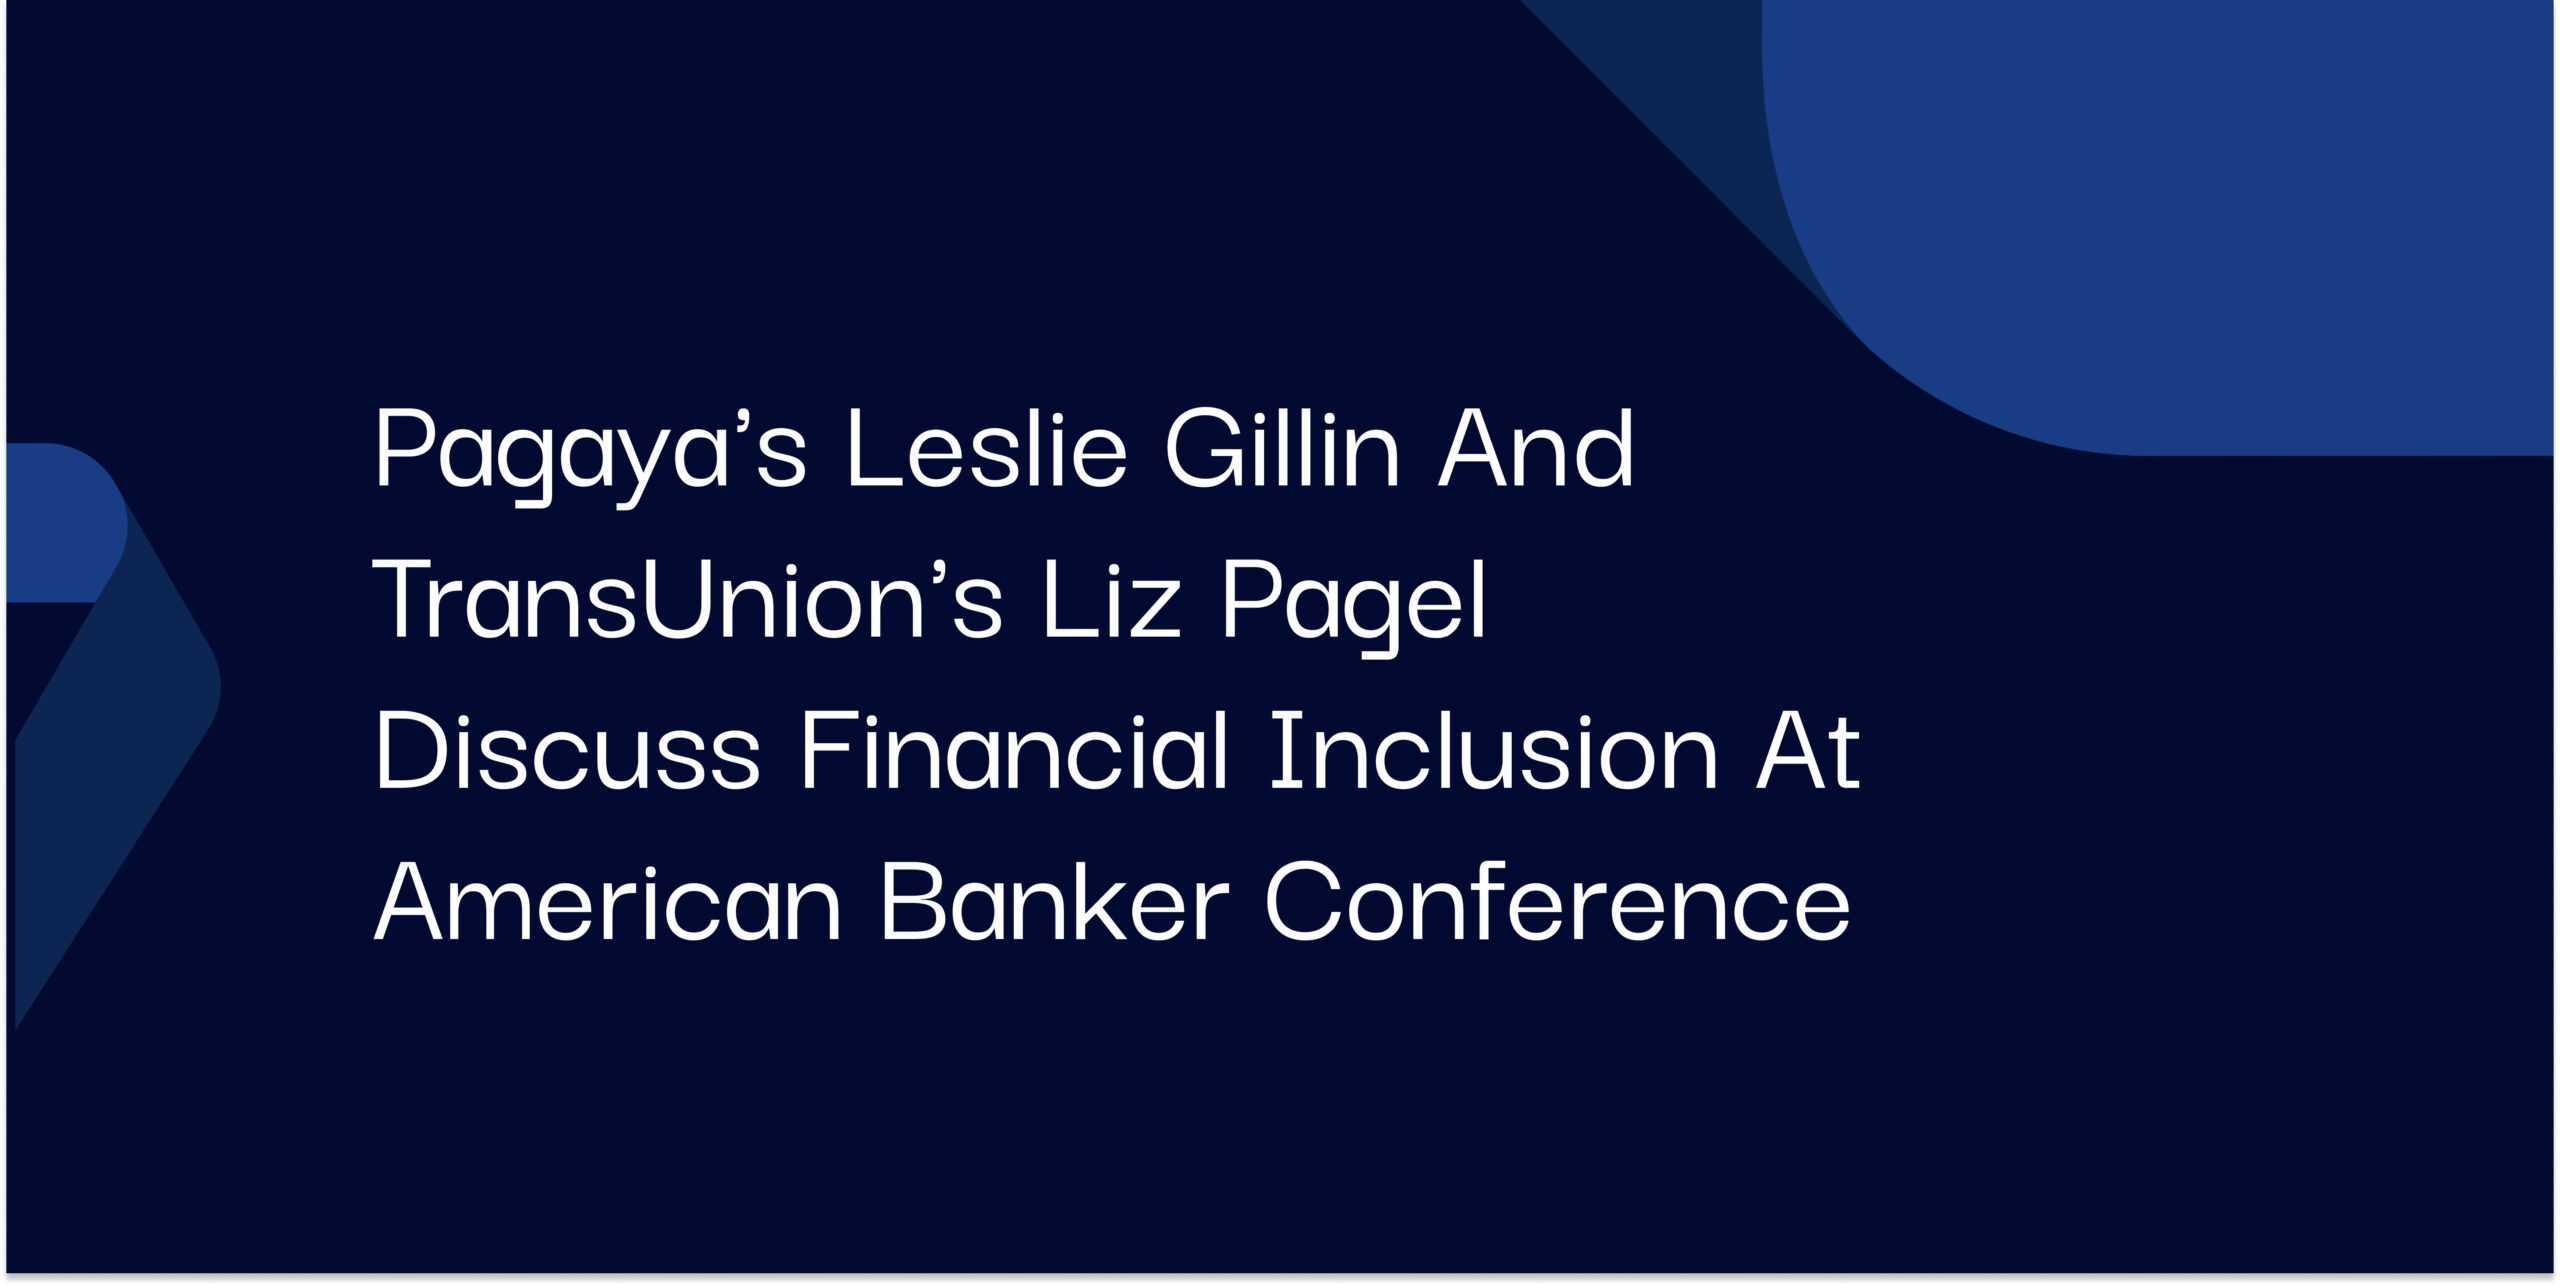 Pagaya's Leslie Gillin and TransUnion's Liz Pagel Discuss Financial Inclusion at American Banker Conference